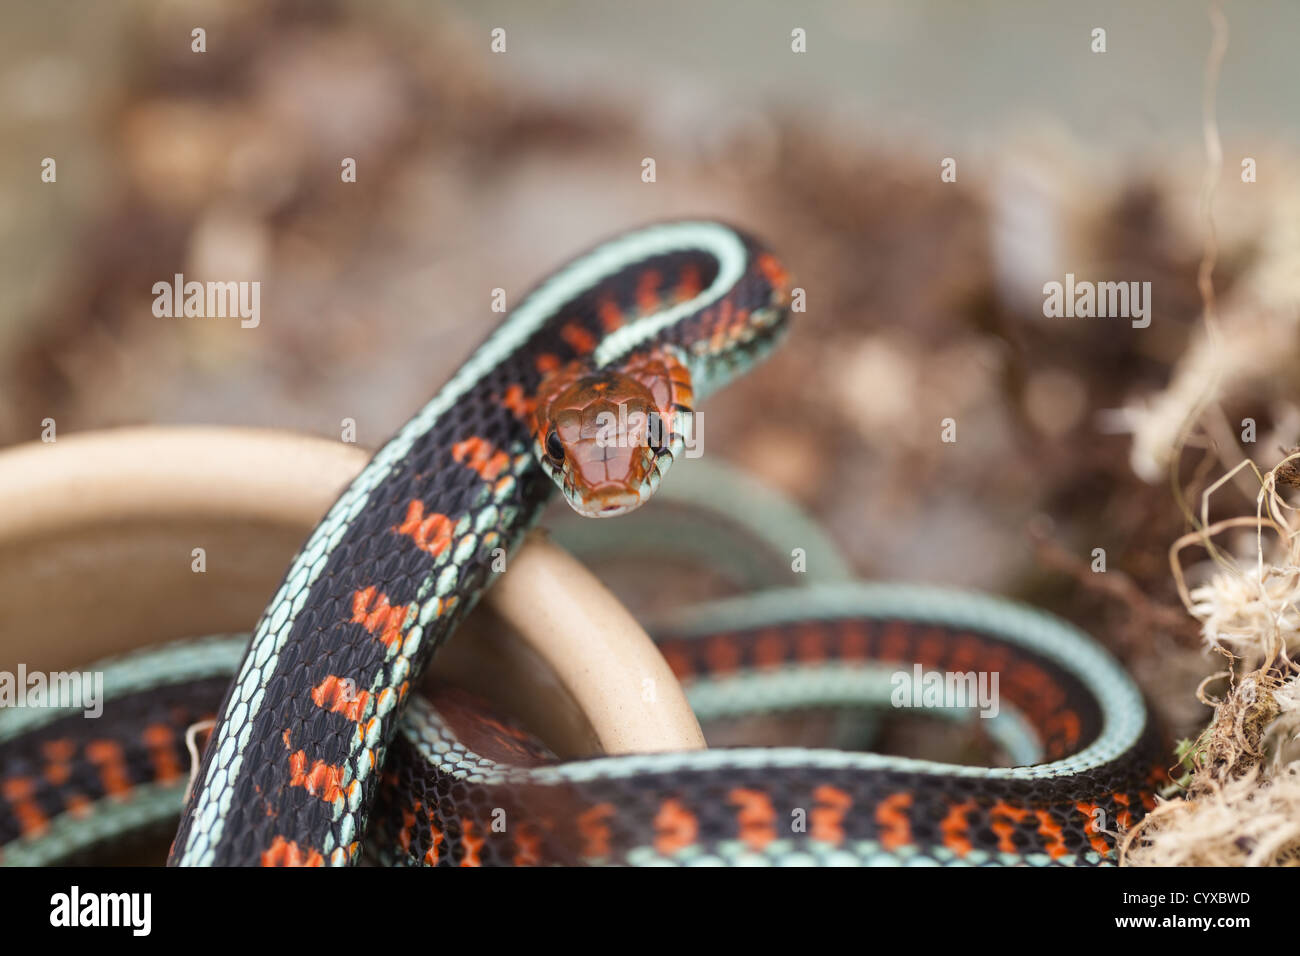 California Red-sided Garter Snake (Thamnophis sirtalis infernalis). Defensive behavior posture provoked by the disturbance in a vivarium. Stock Photo